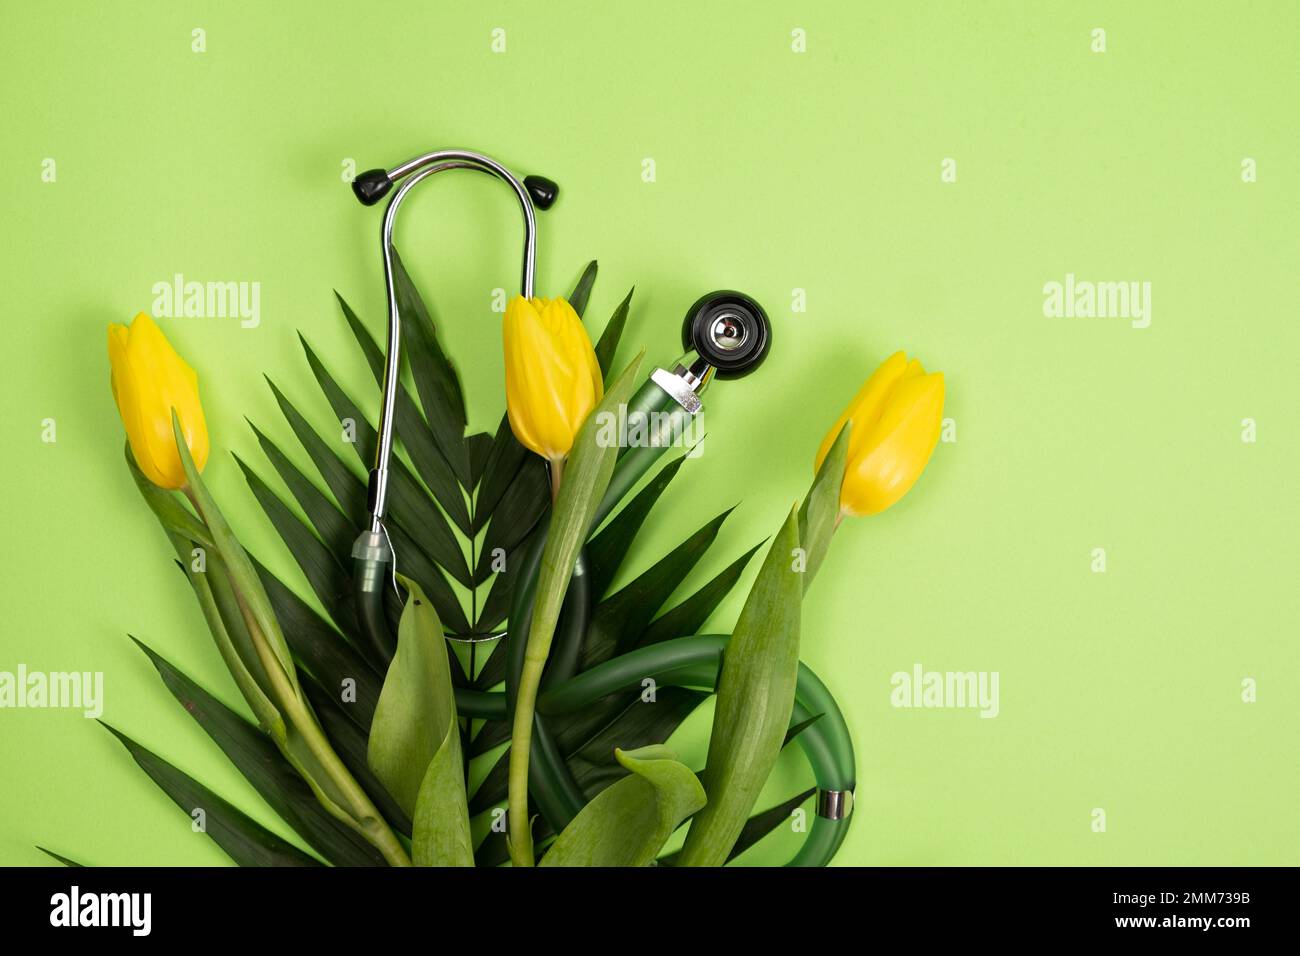 Bouquet of flowers and stethoscope on a green background, a place for text, happy doctors day, nurses week and other medical holidays. Stock Photo